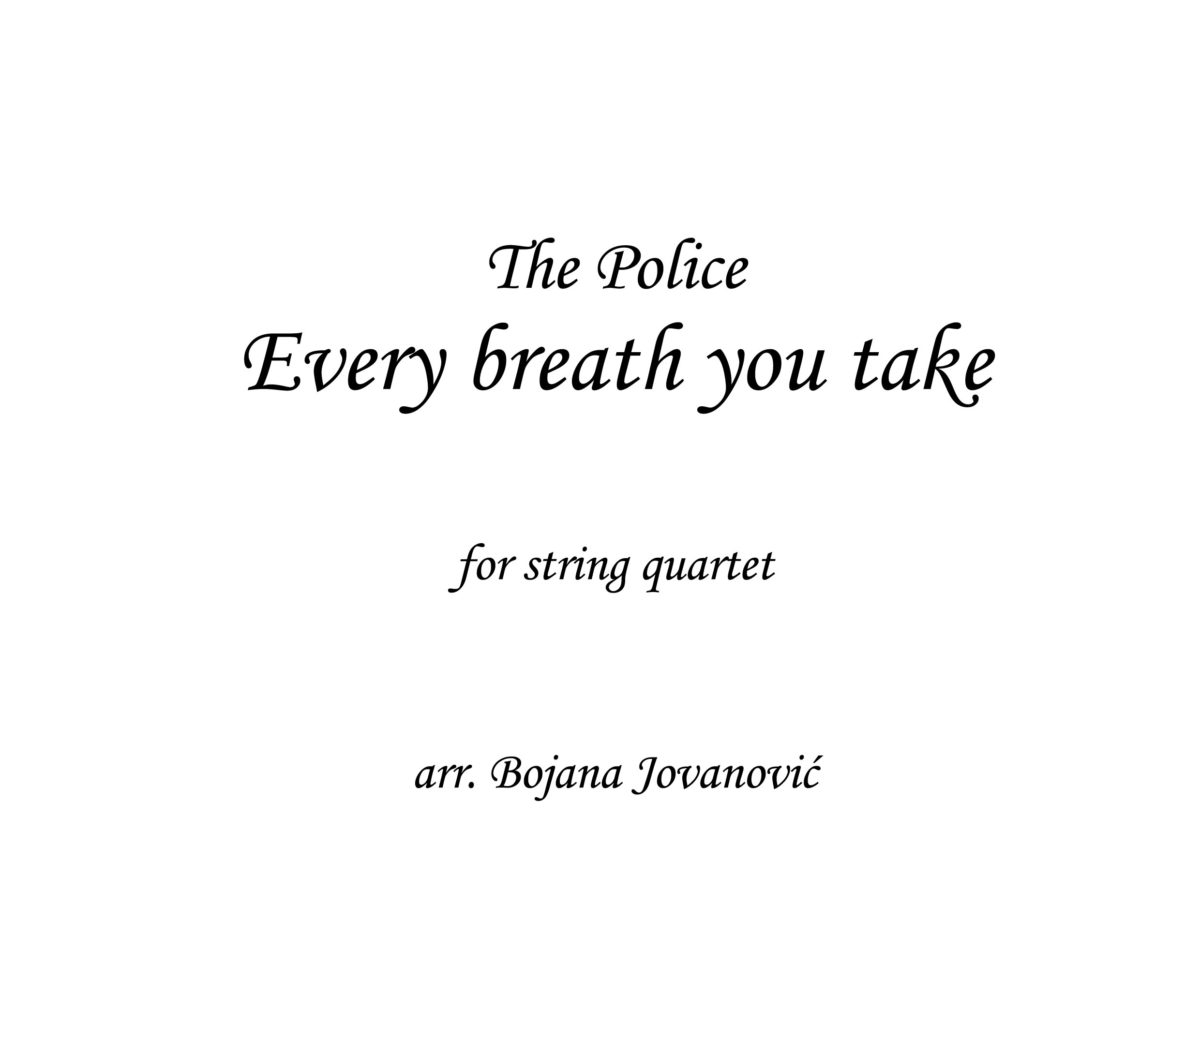 Every breath you take (The Police) Sheet music